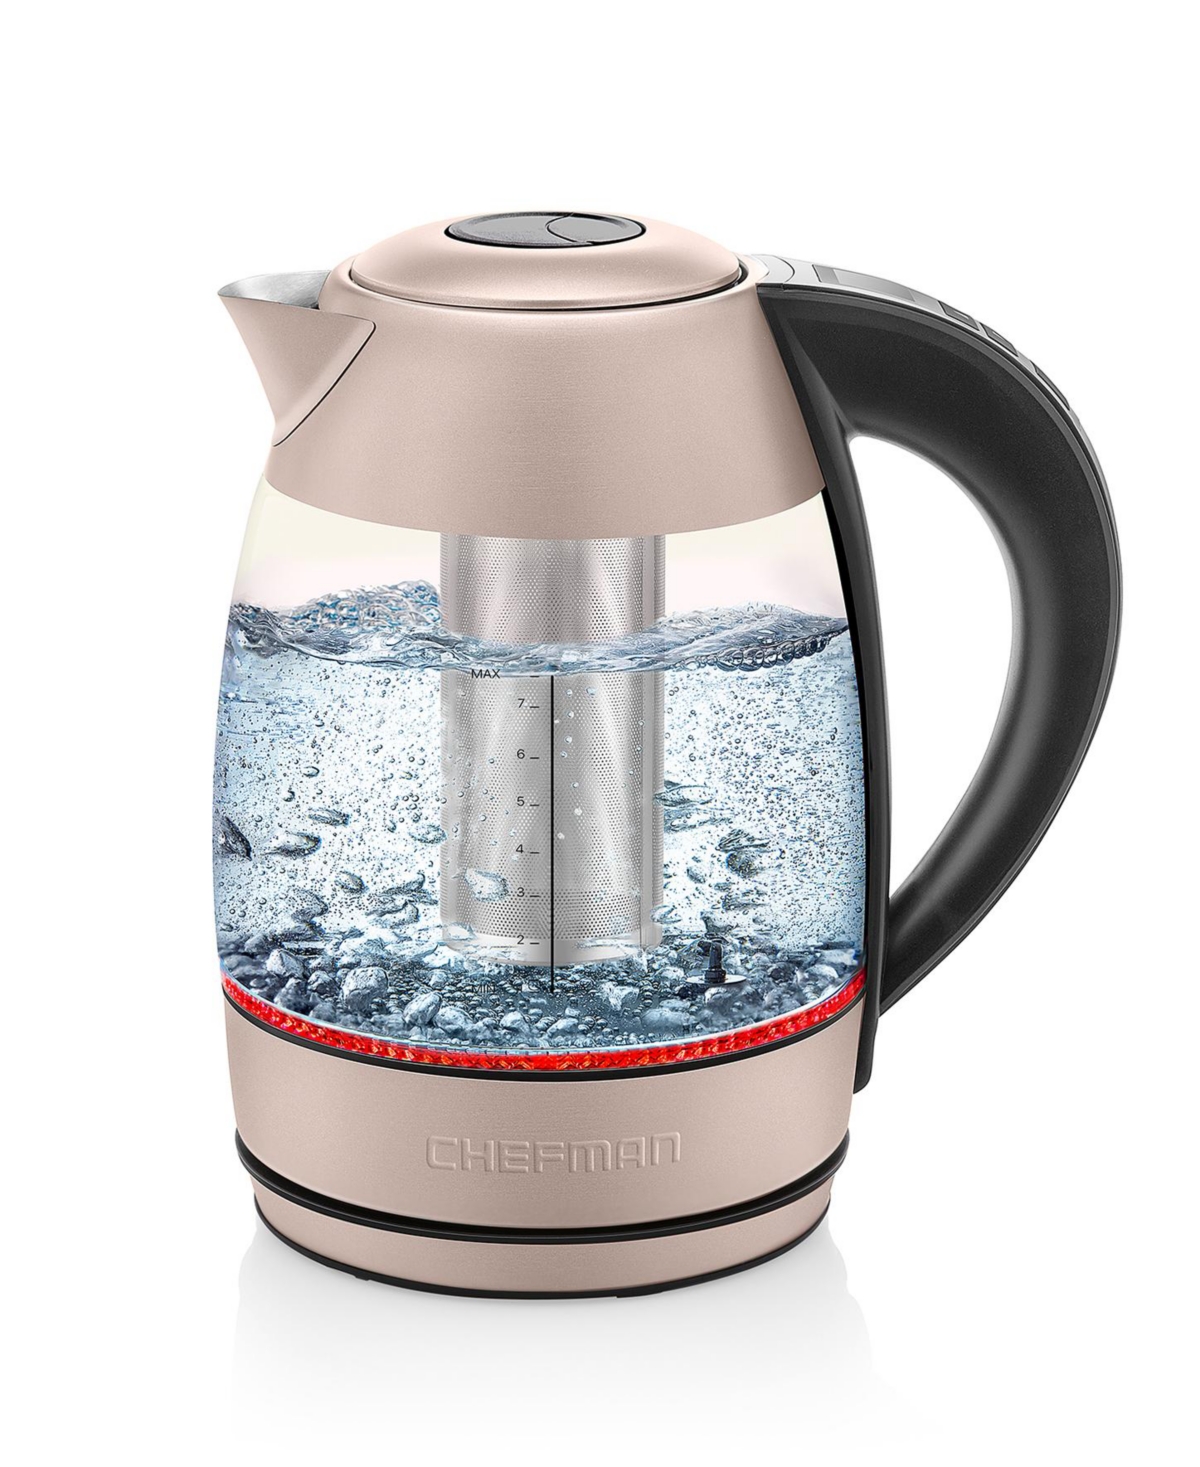 Chefman 1.7 Liter Glass Precision Control Electric Kettle In Rose